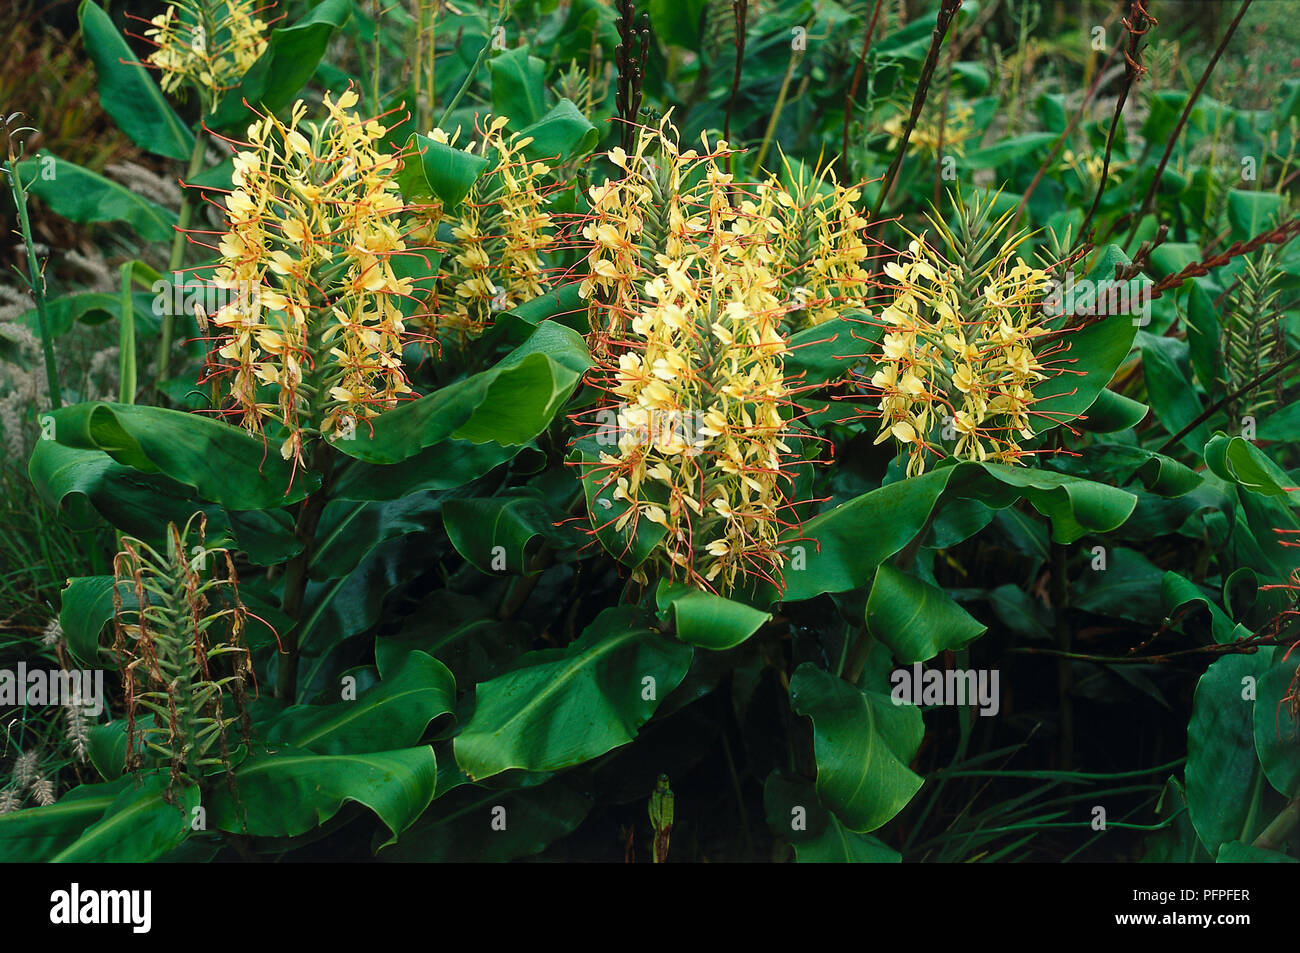 Hedychium Gardnerianum Kahili Ginger Ginger Lily Flowers And Leaves Stock Photo Alamy